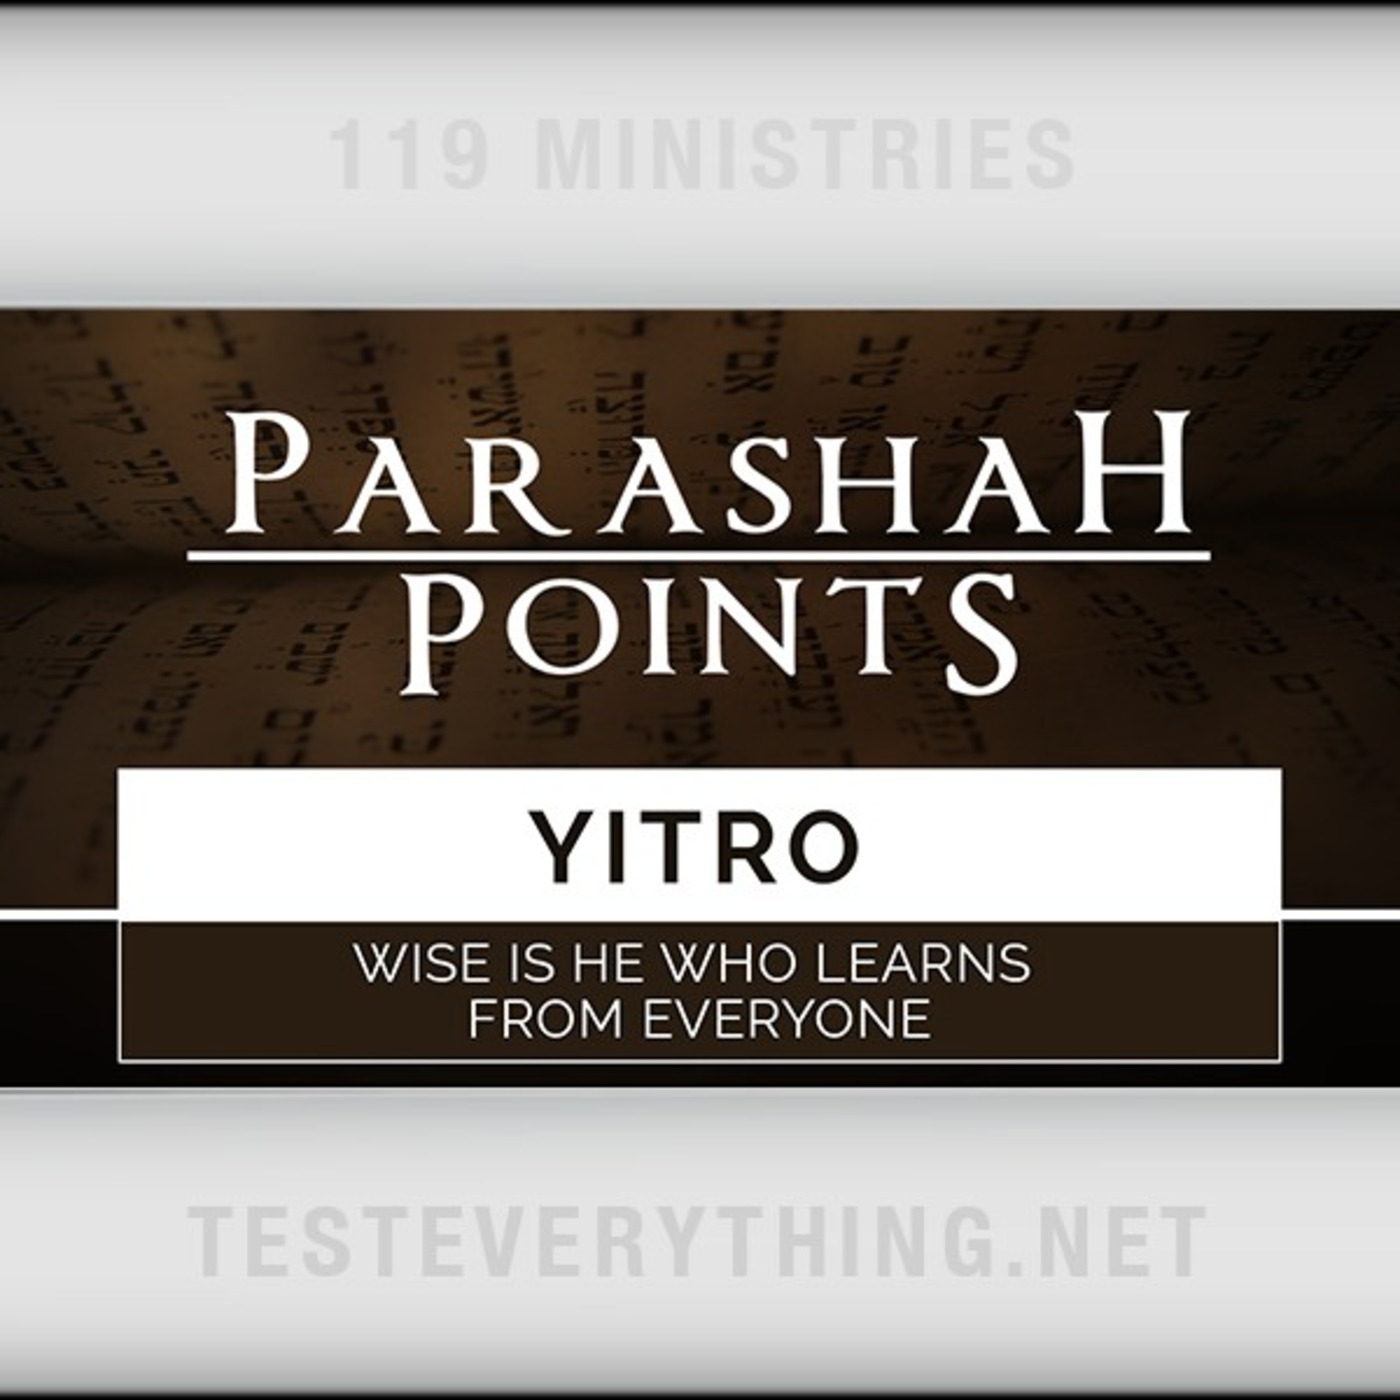 Parashah Points: Yitro - Wise is He Who Learns From Everyone